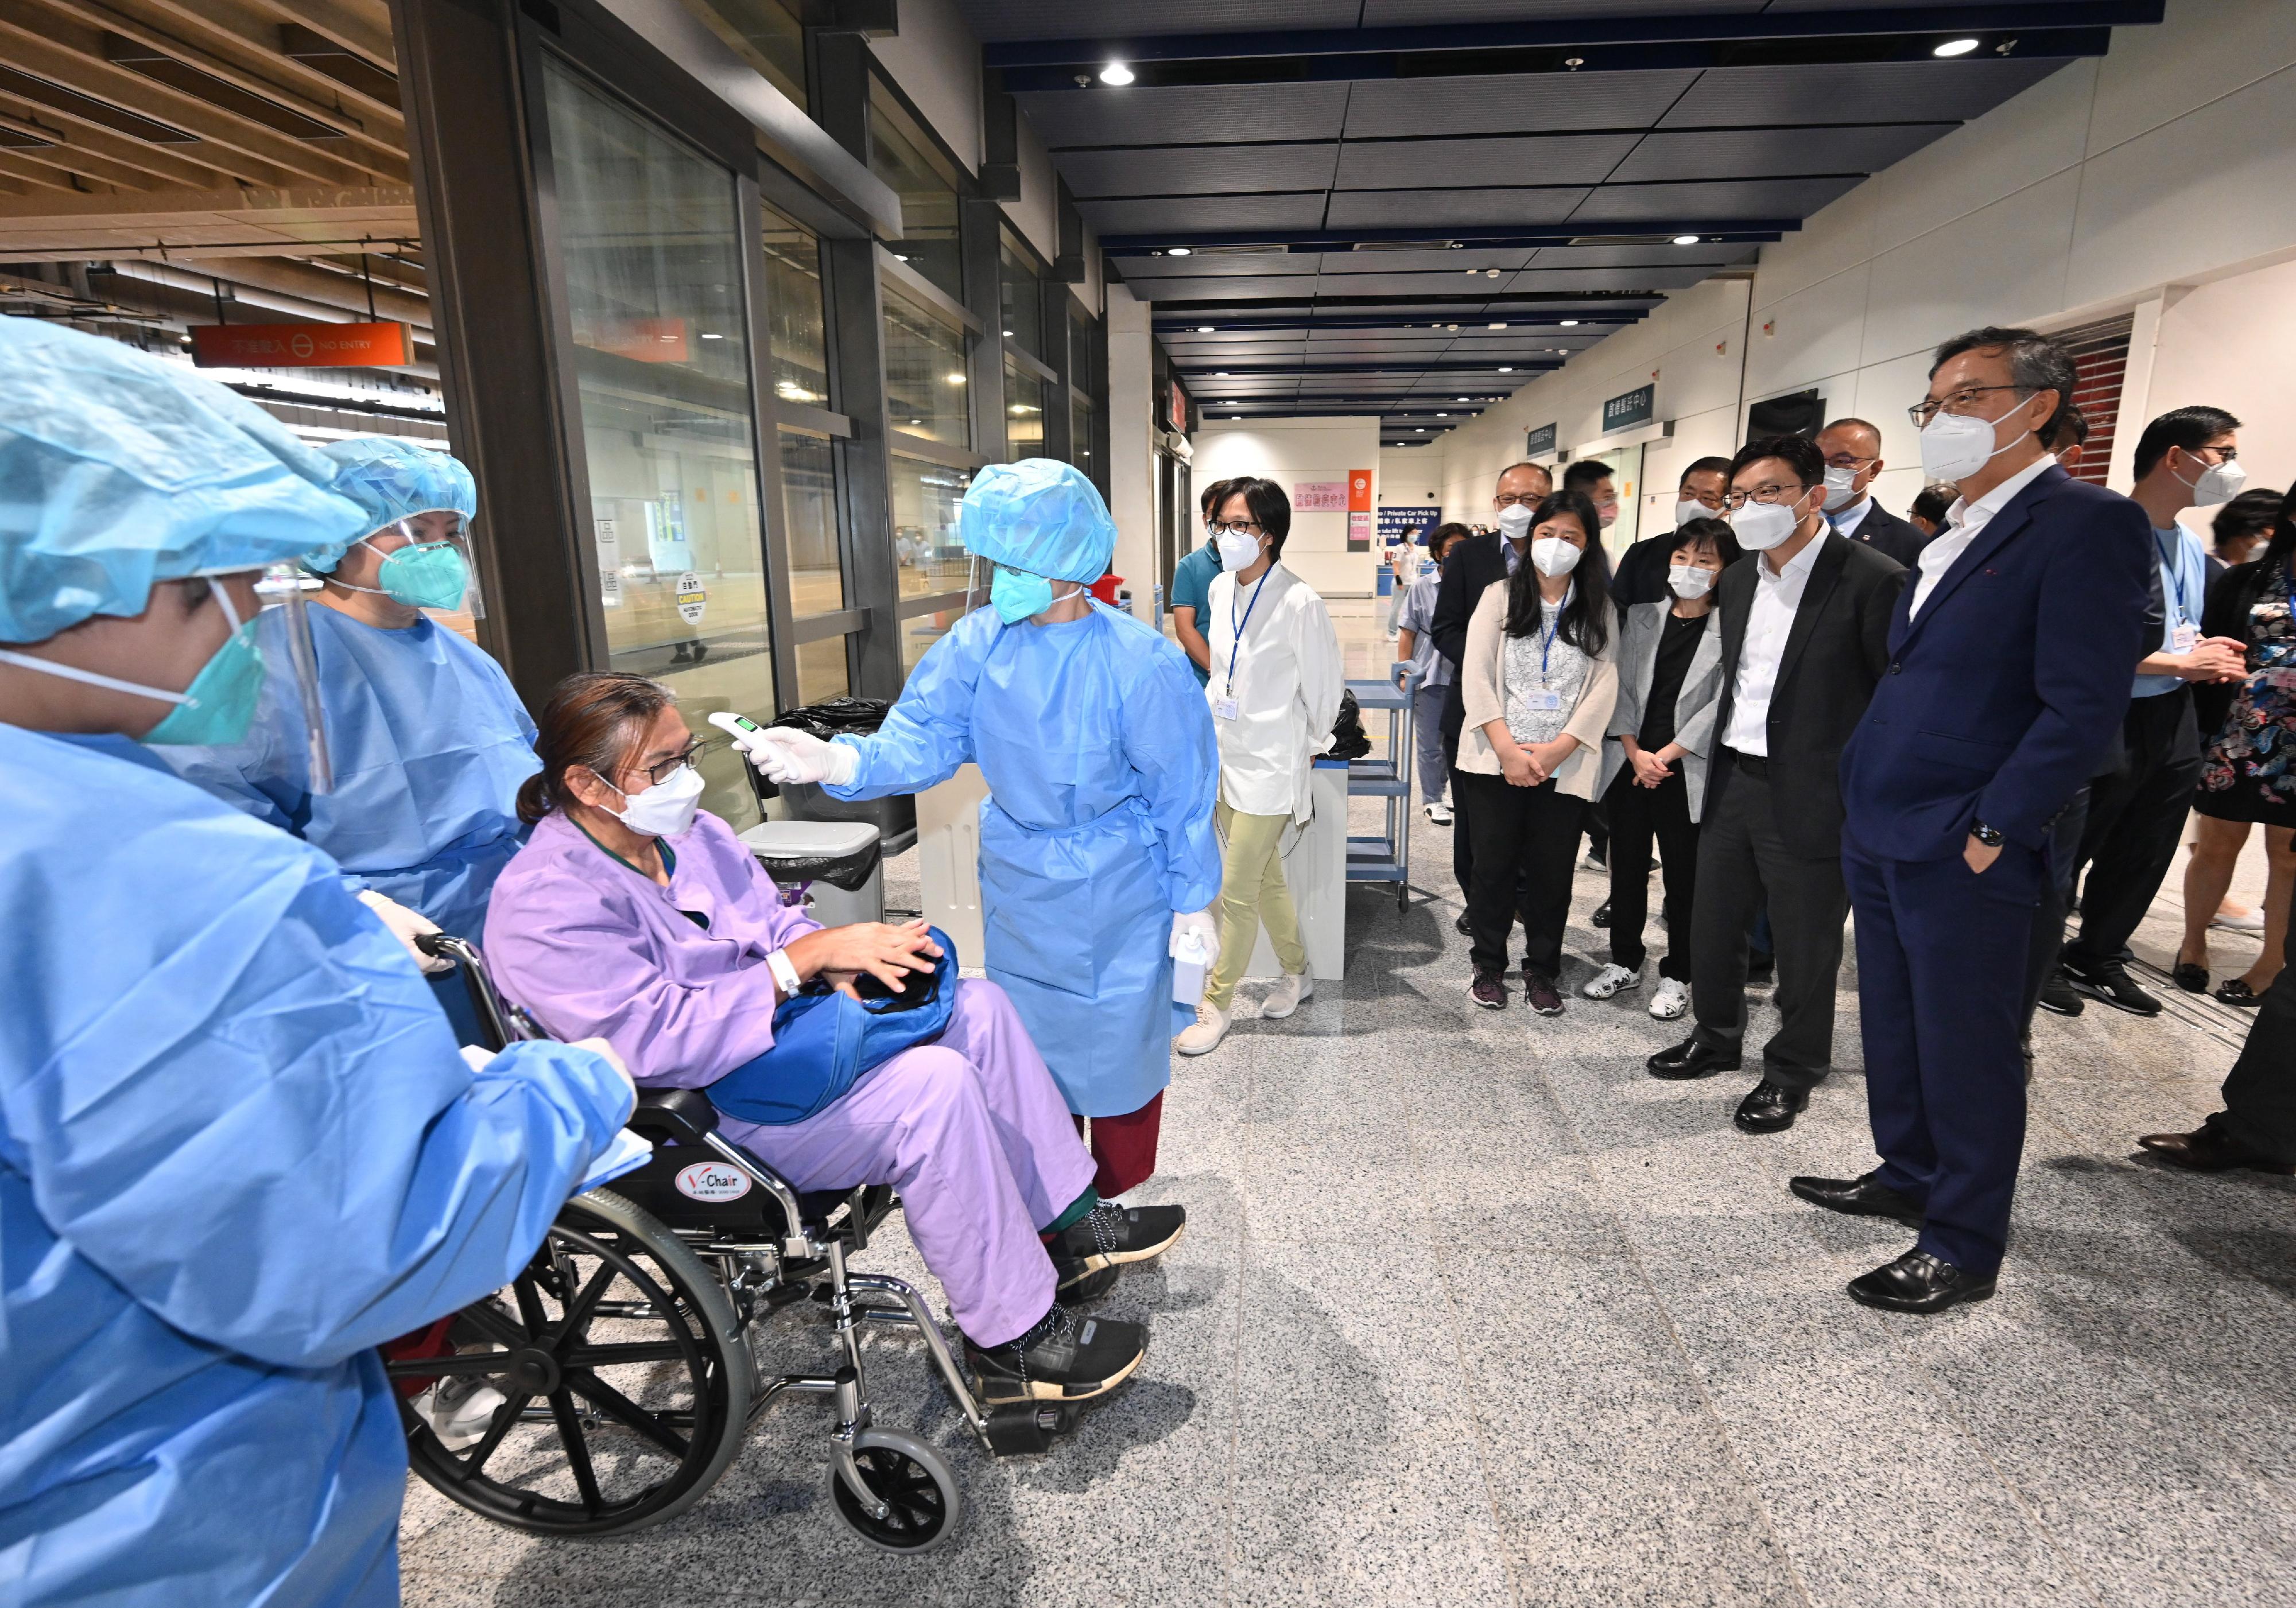 The Secretary for Labour and Welfare, Mr Chris Sun, today (September 1) visited the Kai Tak Quarantine Centre at the Kai Tak Cruise Terminal to learn more about the preparatory work prior to its commencement of operation tomorrow (September 2). Photo shows Mr Sun (front row, second right), accompanied by the Director of Social Welfare, Miss Charmaine Lee (front row, third right), and the Chief Executive Officer of Haven of Hope Christian Service, Dr Lam Ching-choi (front row, first right), watching a demonstration by staff of the care team on admission procedures for a resident of a residential care home for the elderly, including taking her body temperature first.